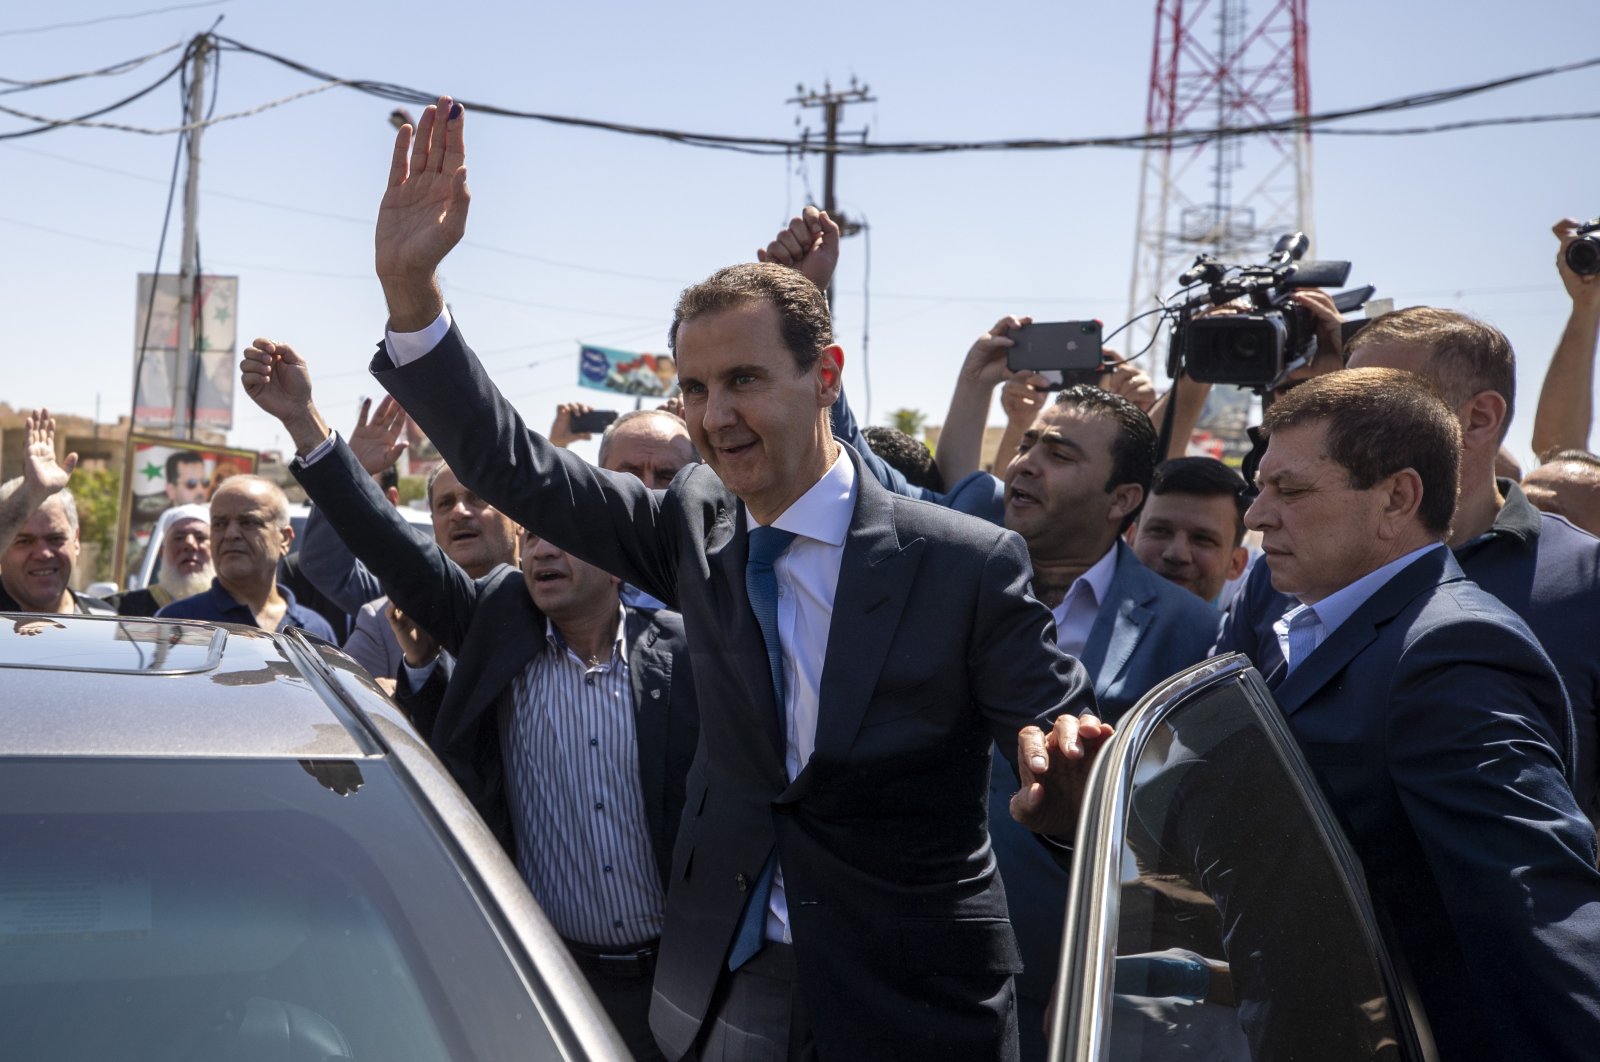 Syria&#039;s Bashar Assad (R) waves to his supporters at a polling station during the presidential elections in the town of Douma, in the eastern Ghouta region, near the Syrian capital Damascus, Syria, Wednesday, May 26, 2021.   (AP Photo)